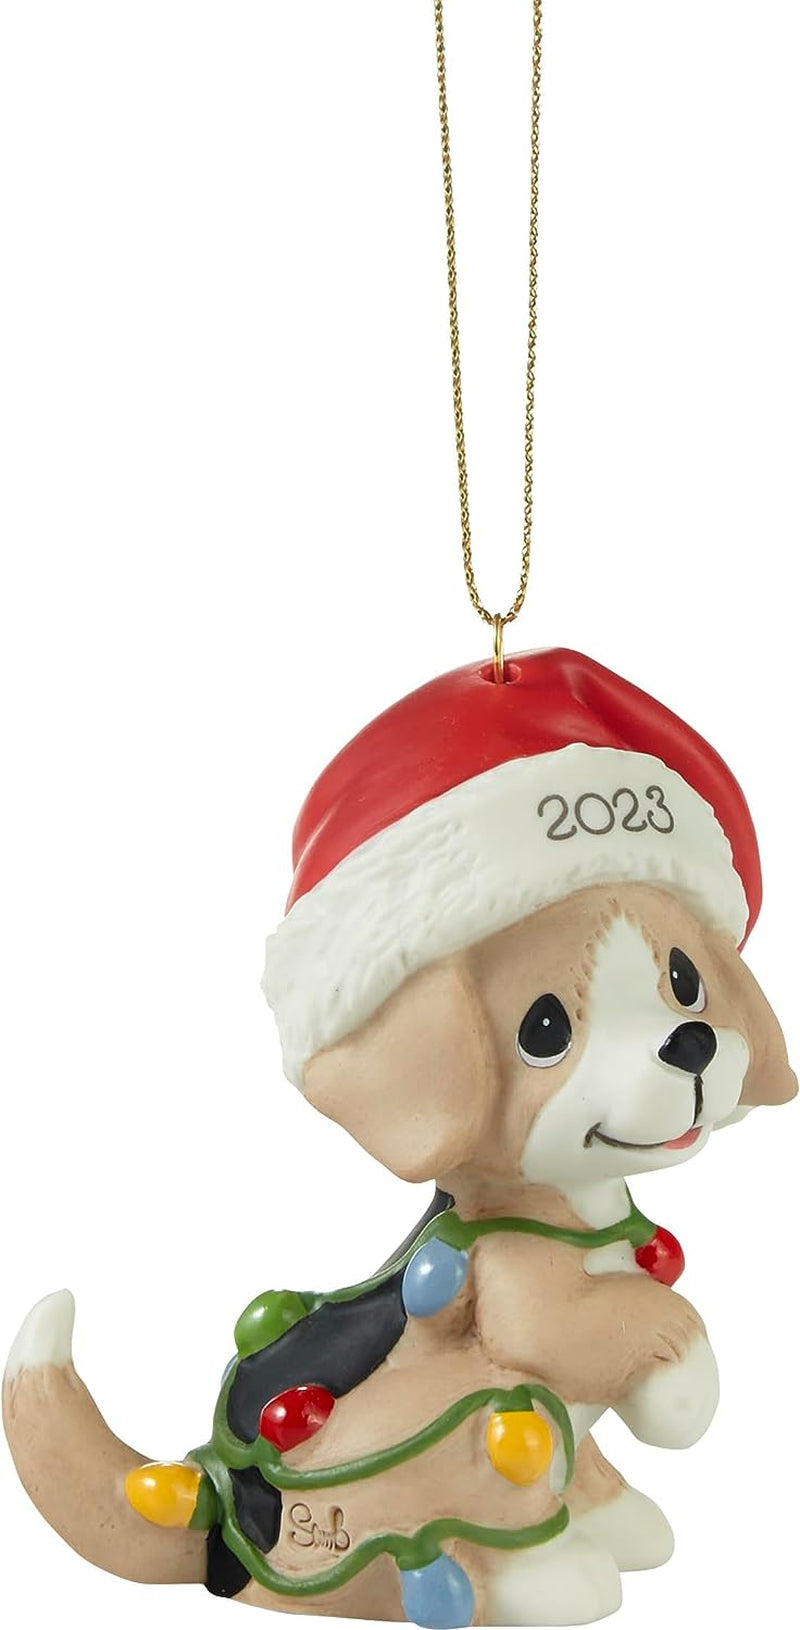 Precious Moments 231008 Tangled in Christmas Fun 2023 Dated Dog Bisque Porcelain Ornament  Precious Moments   